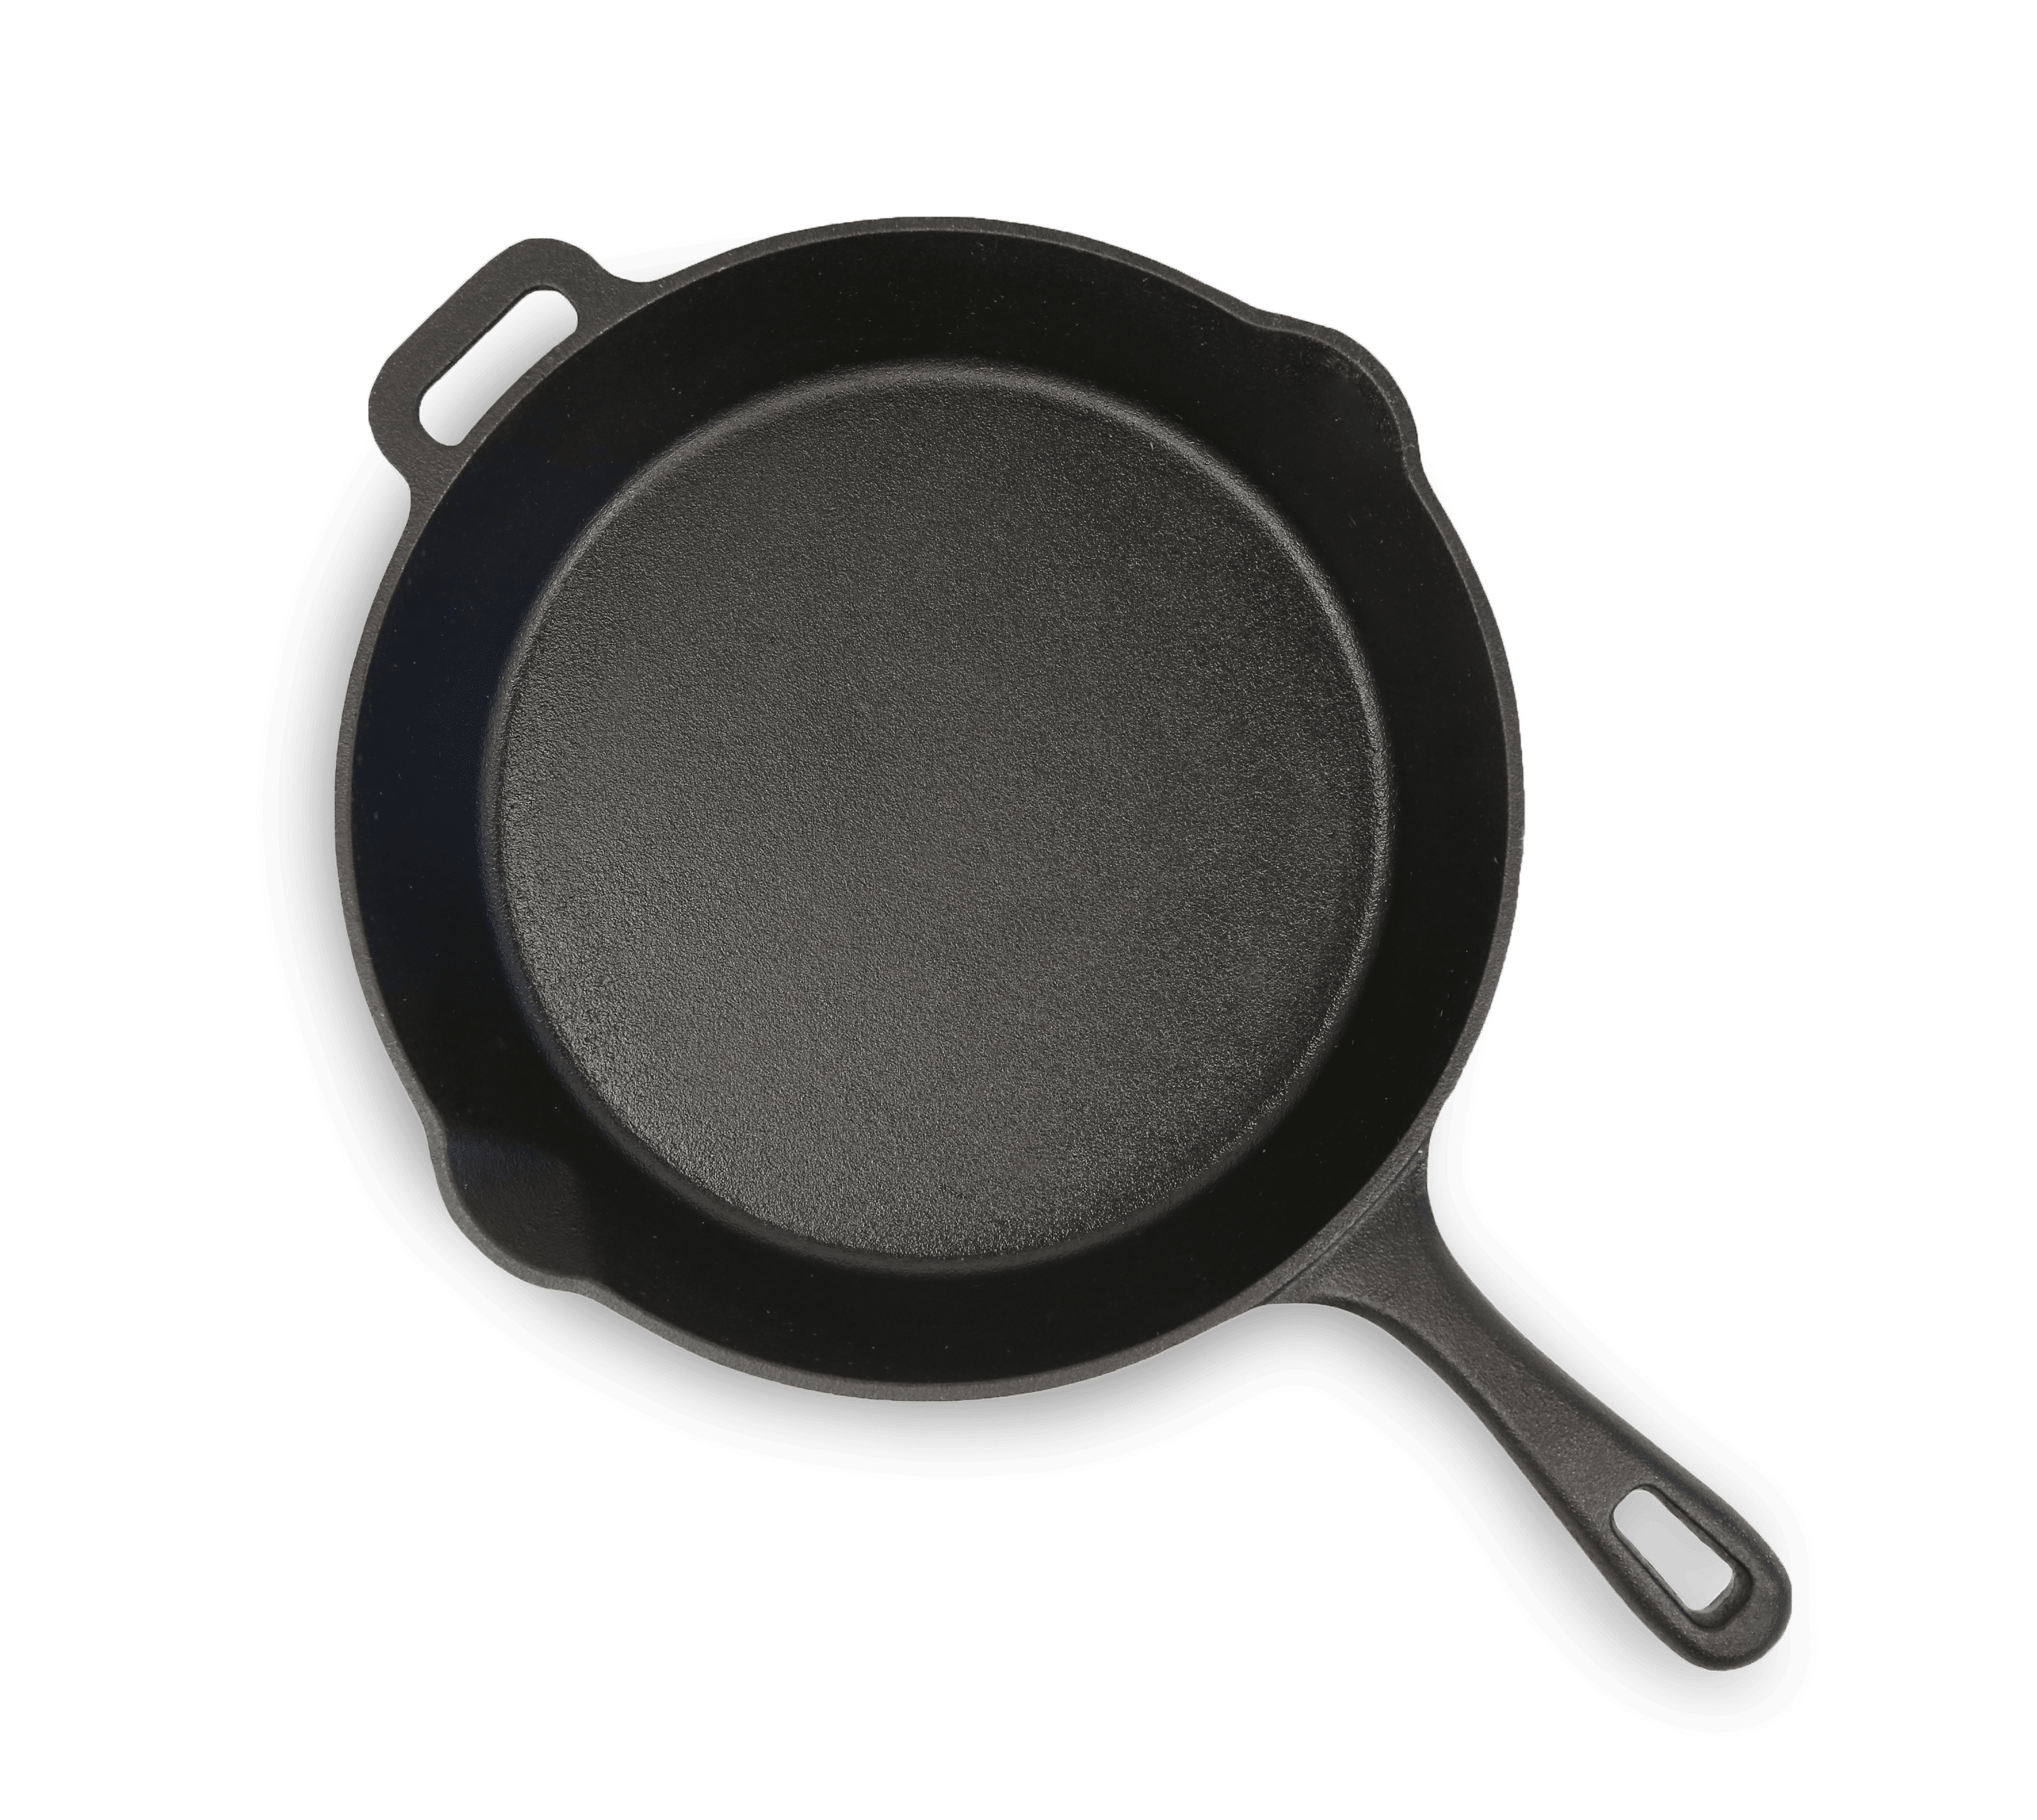 Max K 14-Inch Pizza Pan with Handles - Preseasoned Cast Iron Cooking Pan  for Baking, Roasting, Frying - Black